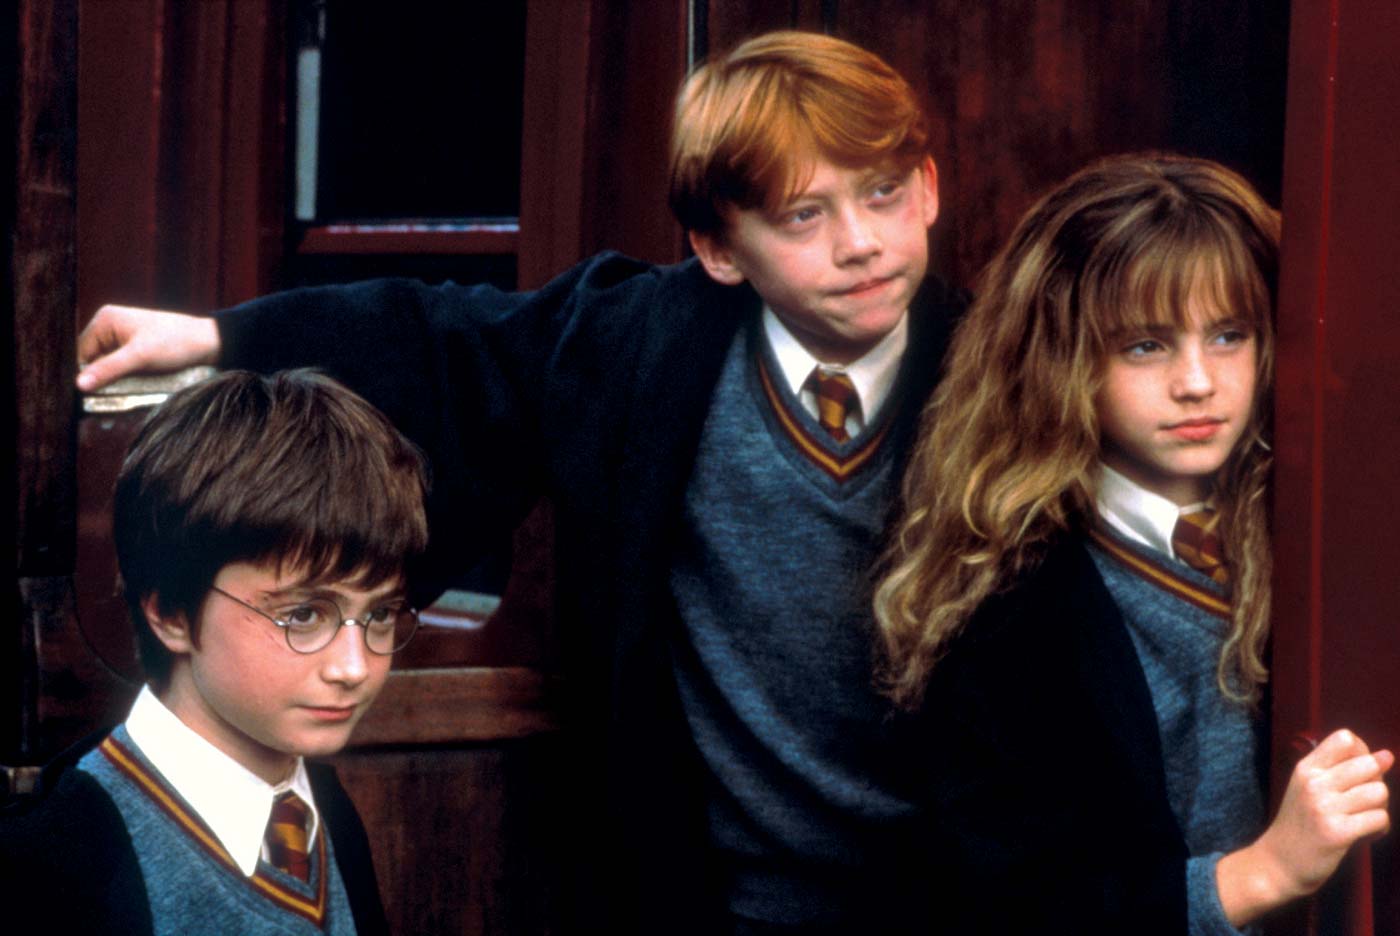 Lot # 163: Harry Potter And The Sorcerer's Stone (2001) - Cast